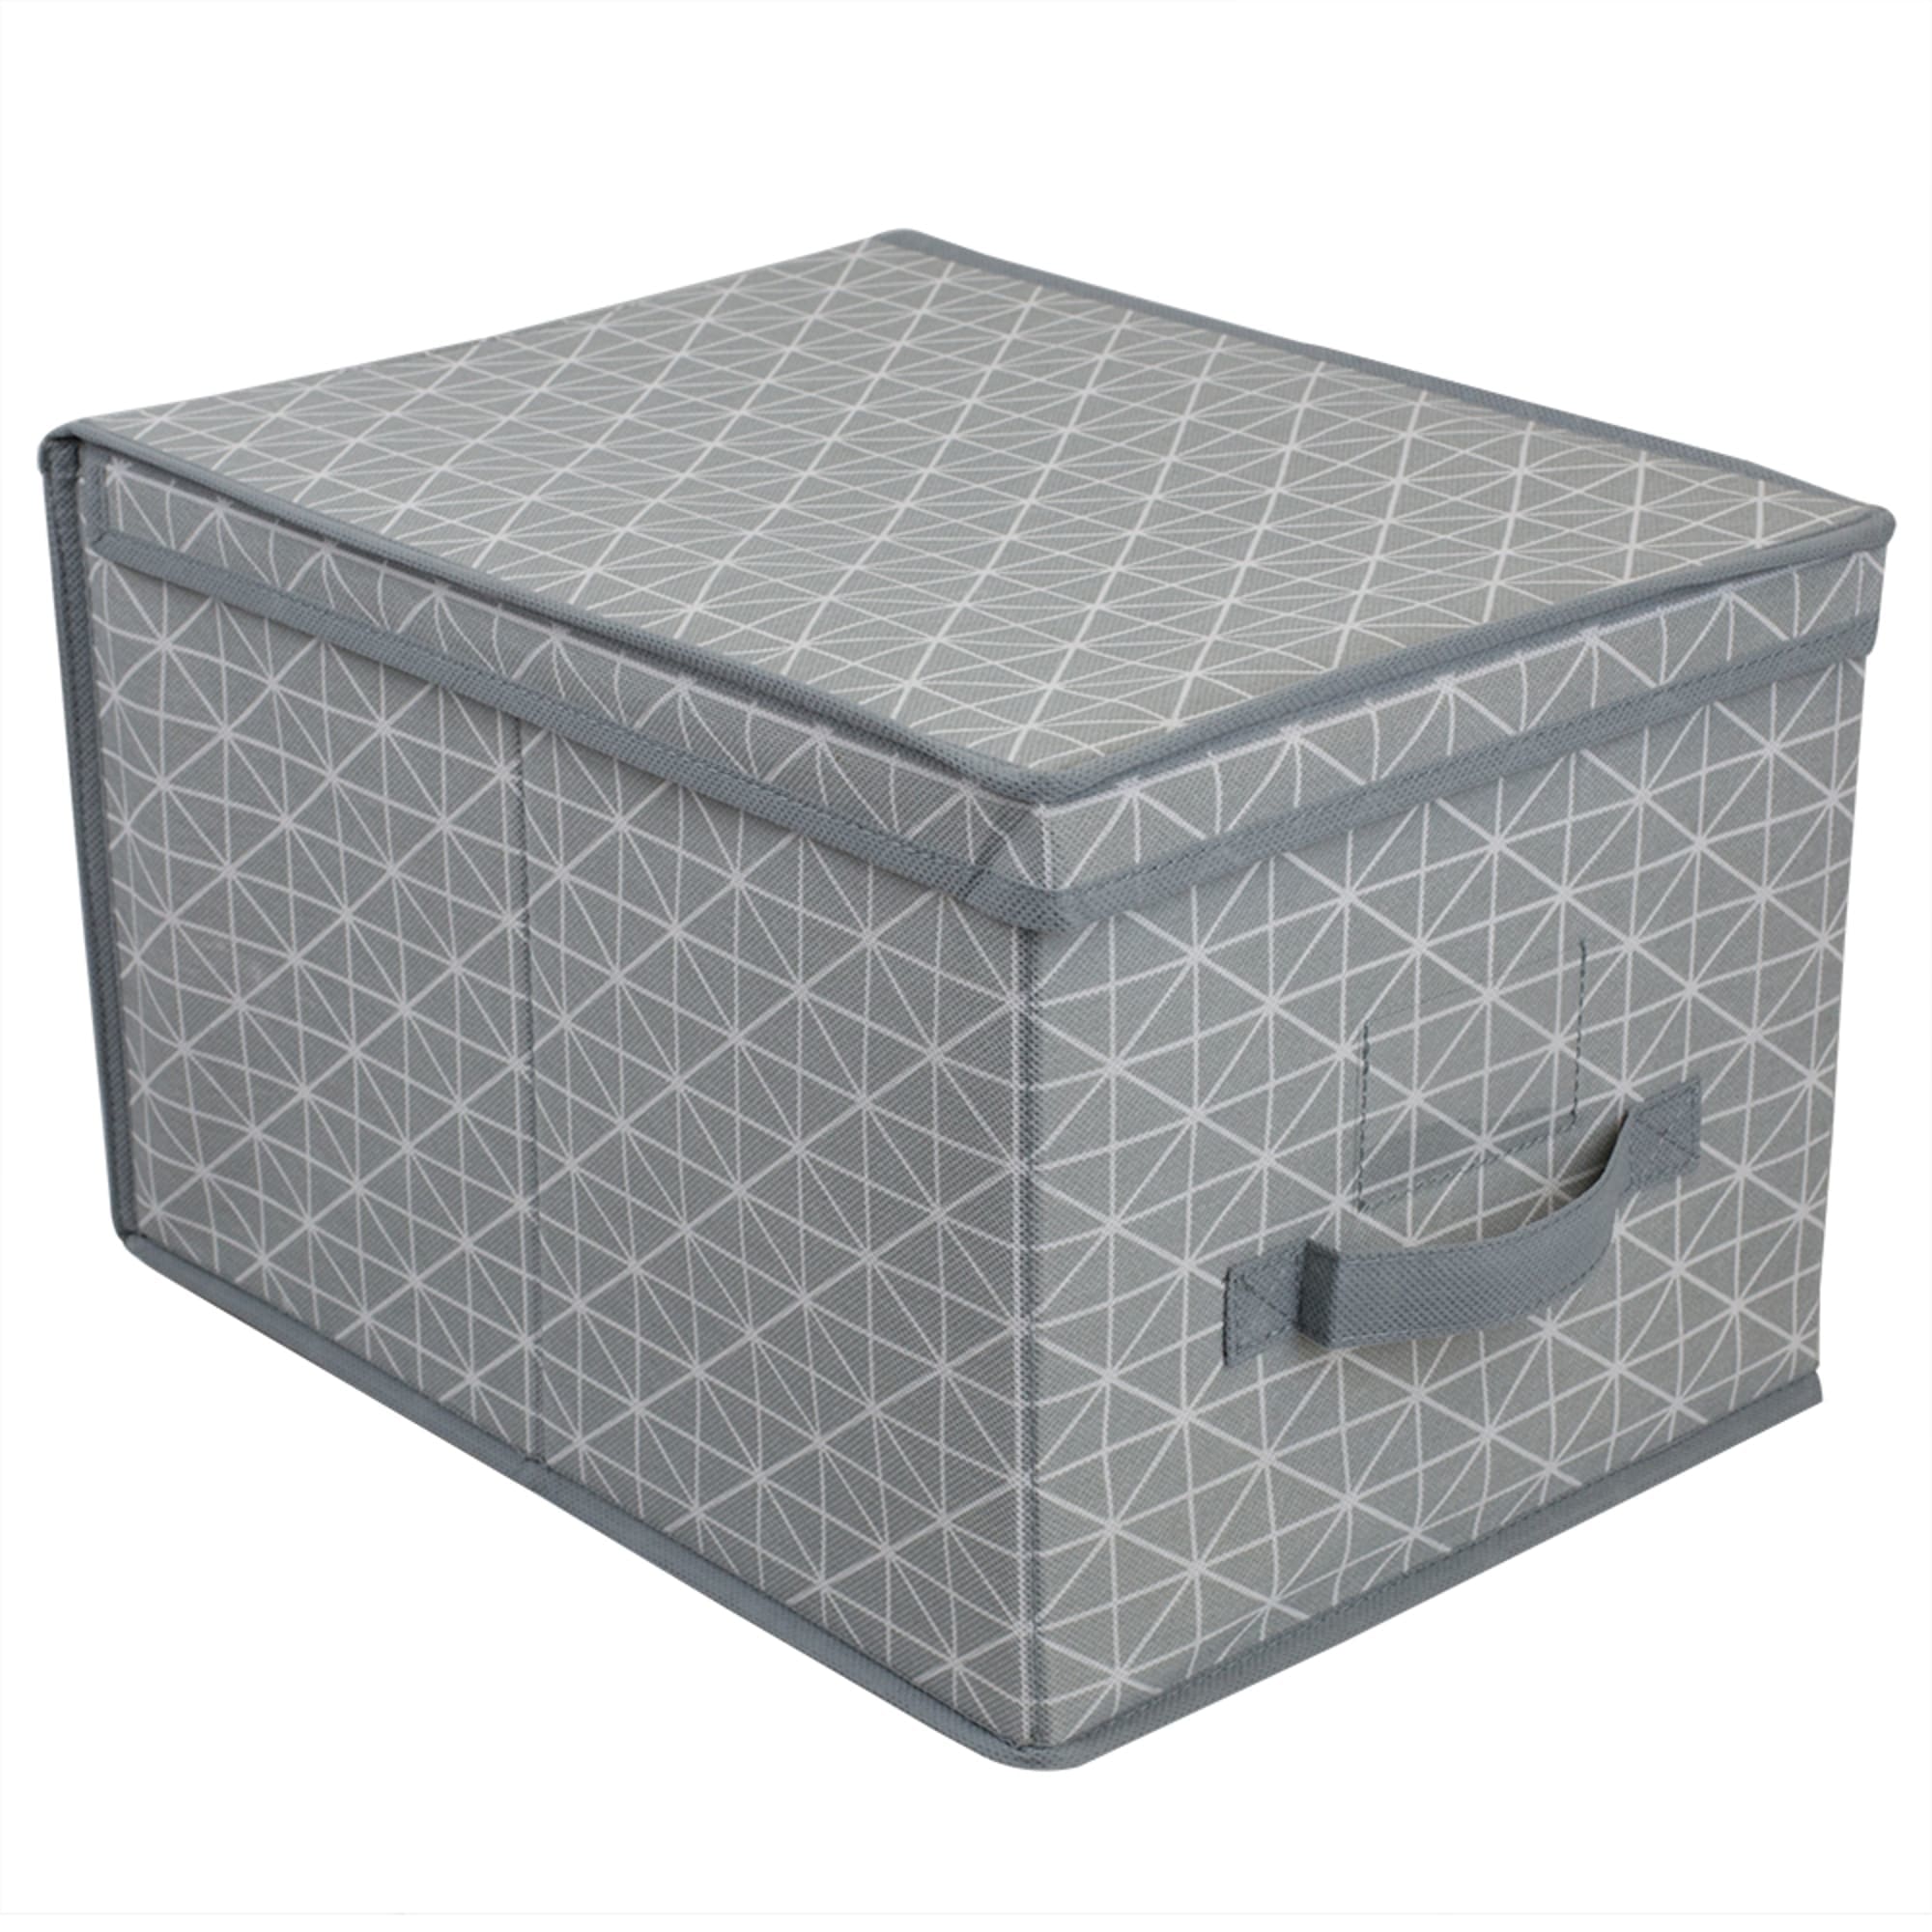 Home Basics Diamond Collection Non-Woven Storage Box, Grey $5.00 EACH, CASE PACK OF 12